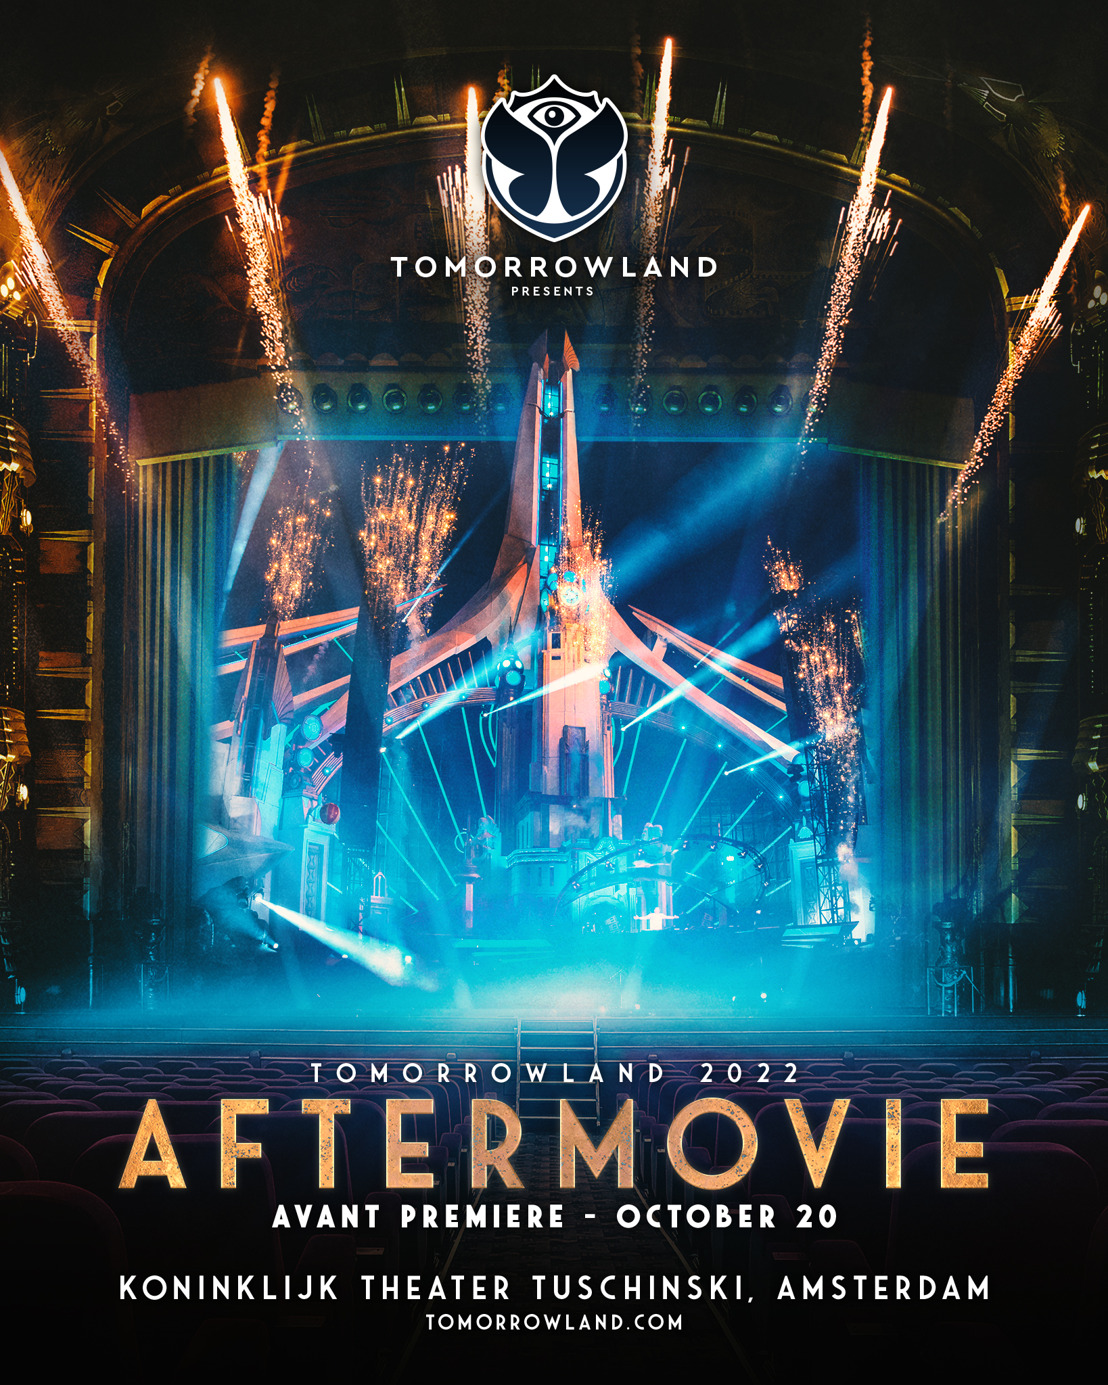 Tomorrowland is holding an exclusive avant premiere of the official 2022 aftermovie in Amsterdam